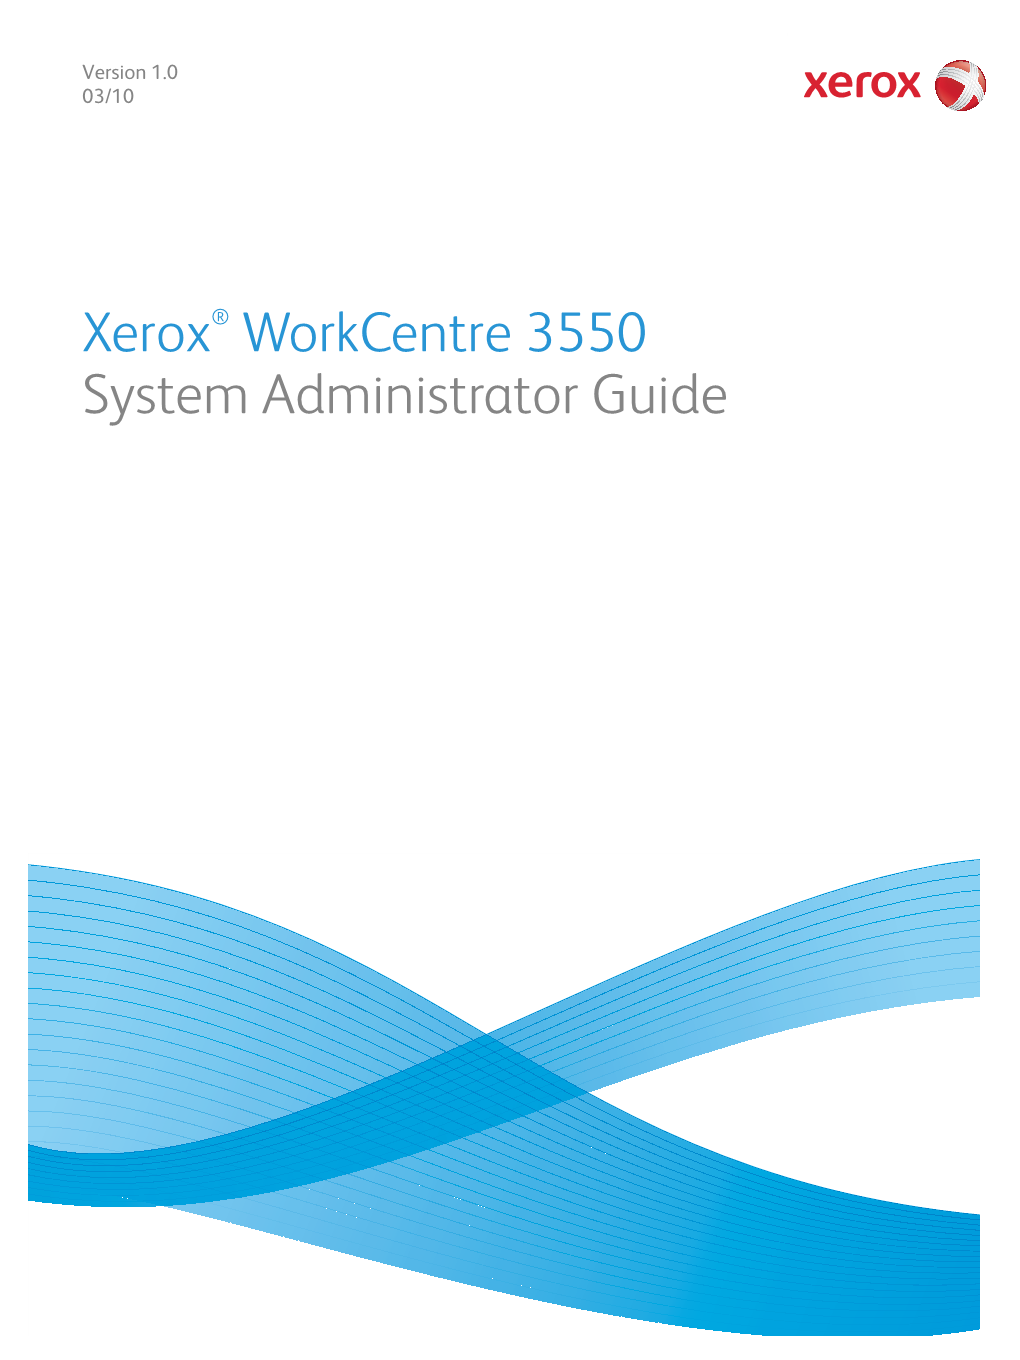 Xerox® Workcentre 3550 System Administrator Guide ©2010 Xerox Corporation